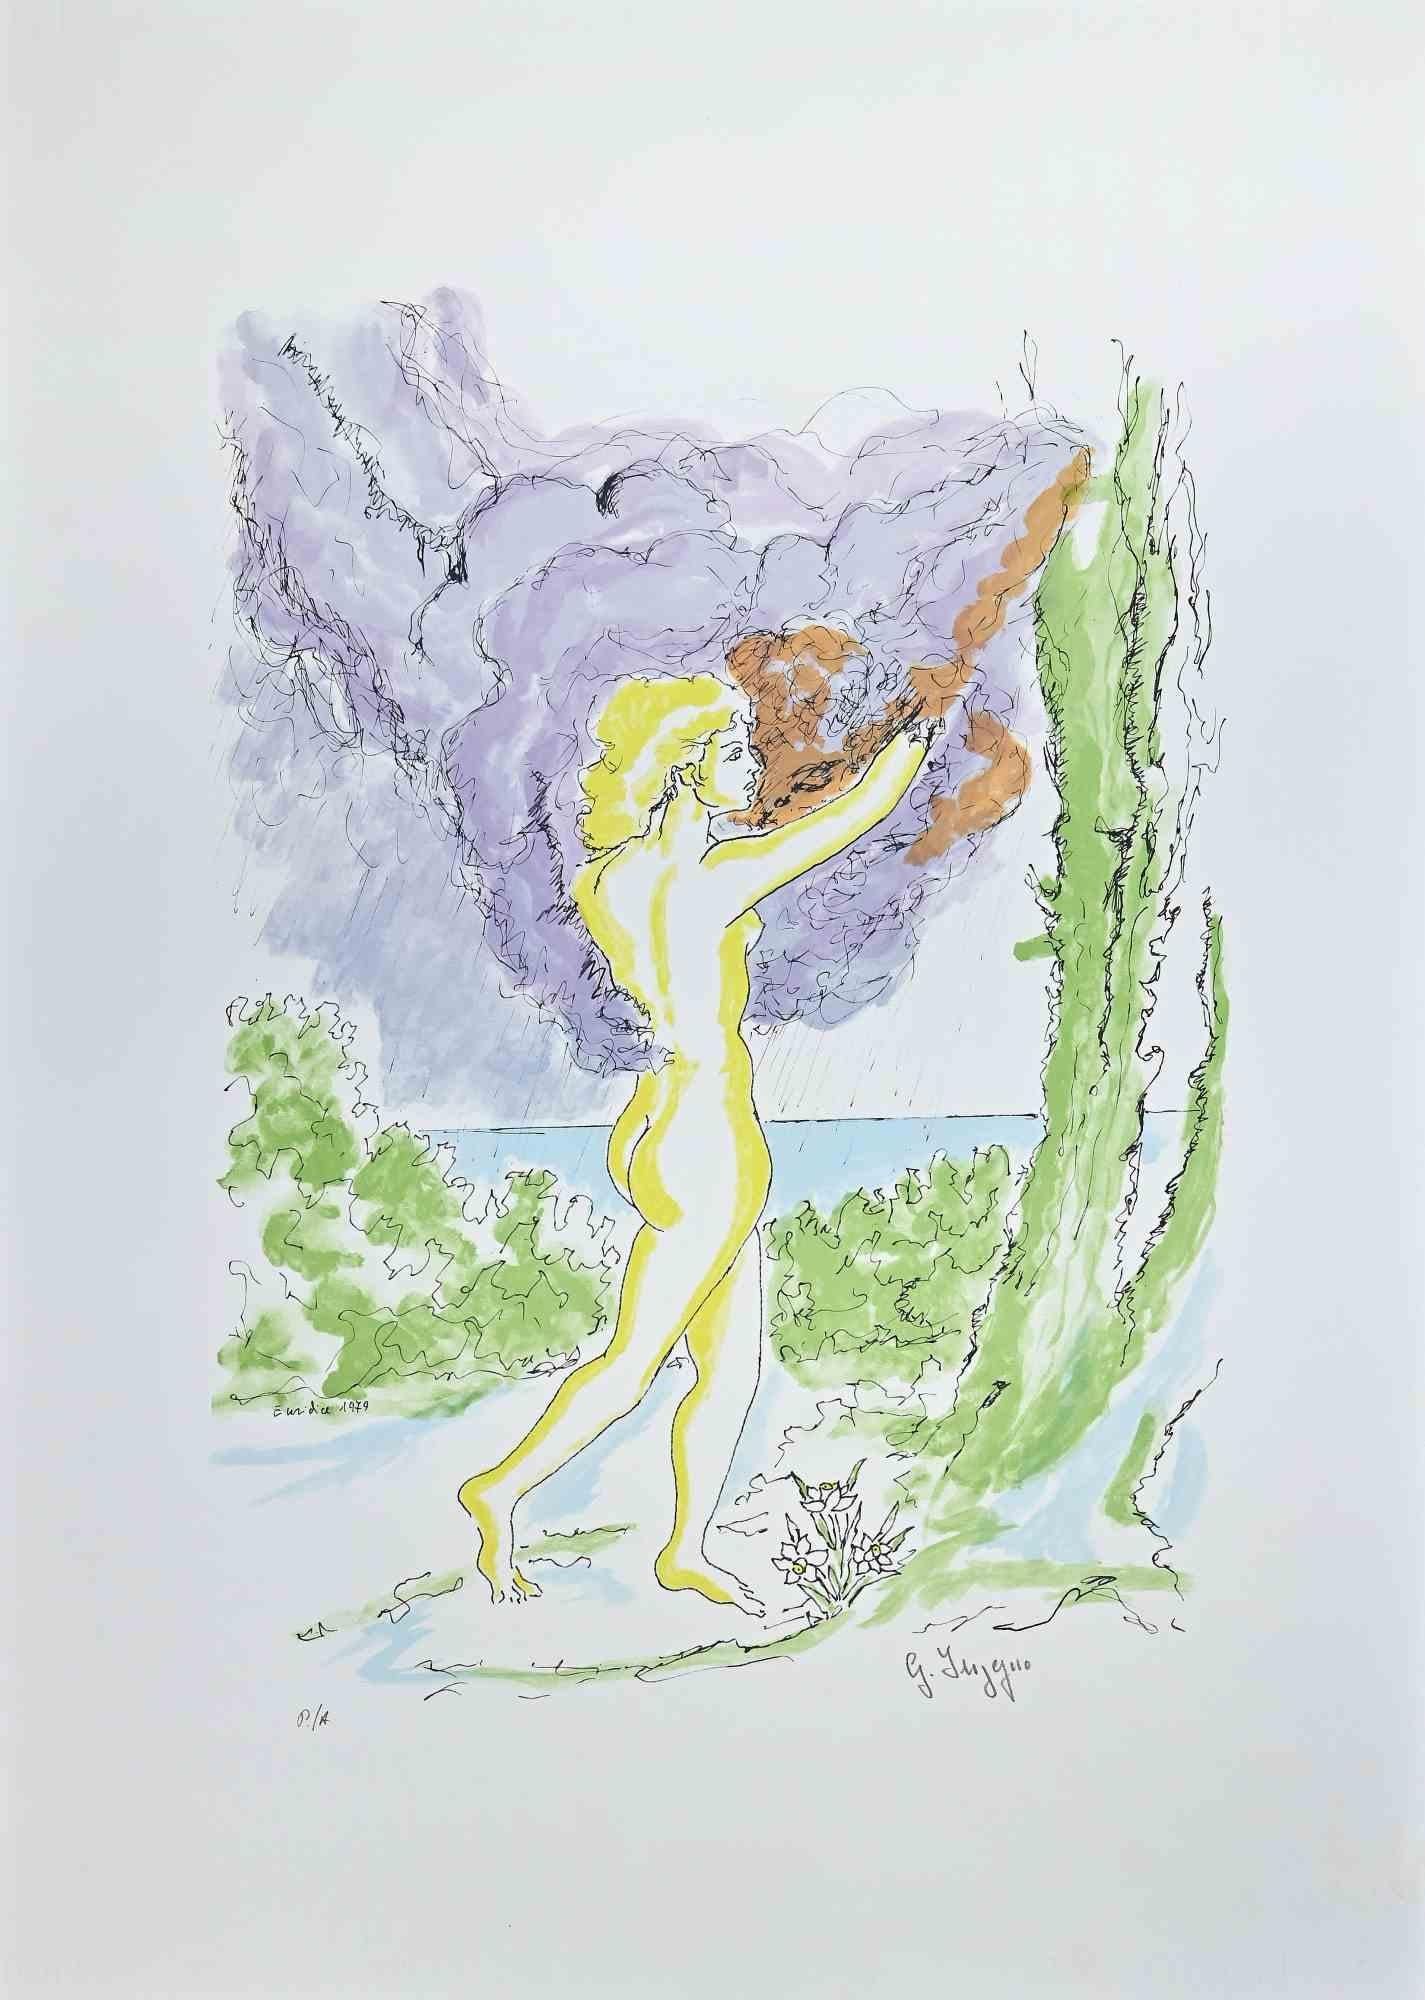 In the Woods is an original Lithograph realized by Giuseppe Ingegno in 1979.

Colored print.

Good conditions.

Hand-signed in pencil on the lower right. Titled and dated on plate.

This beautiful colored print represents Eurydice, an oak nymph and